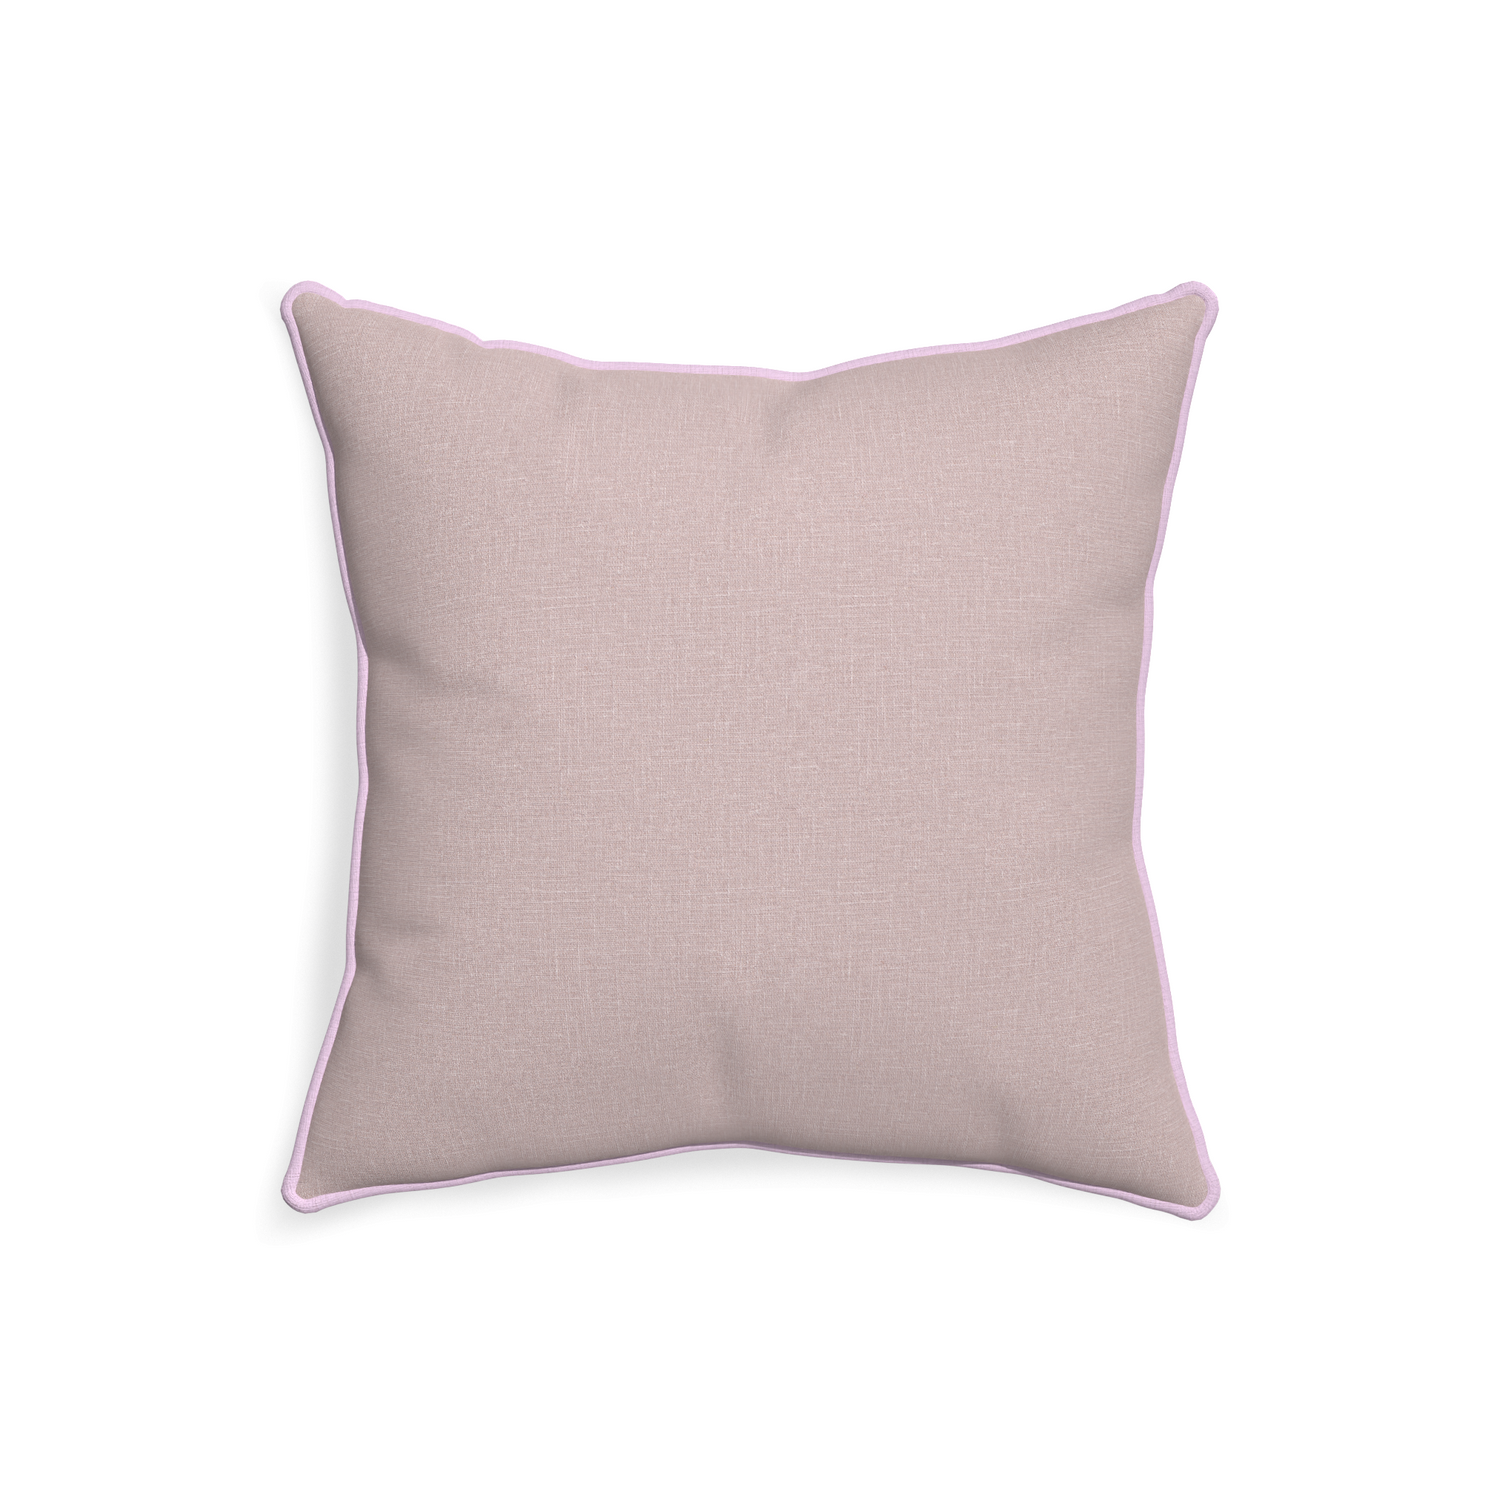 20-square orchid custom mauve pinkpillow with l piping on white background